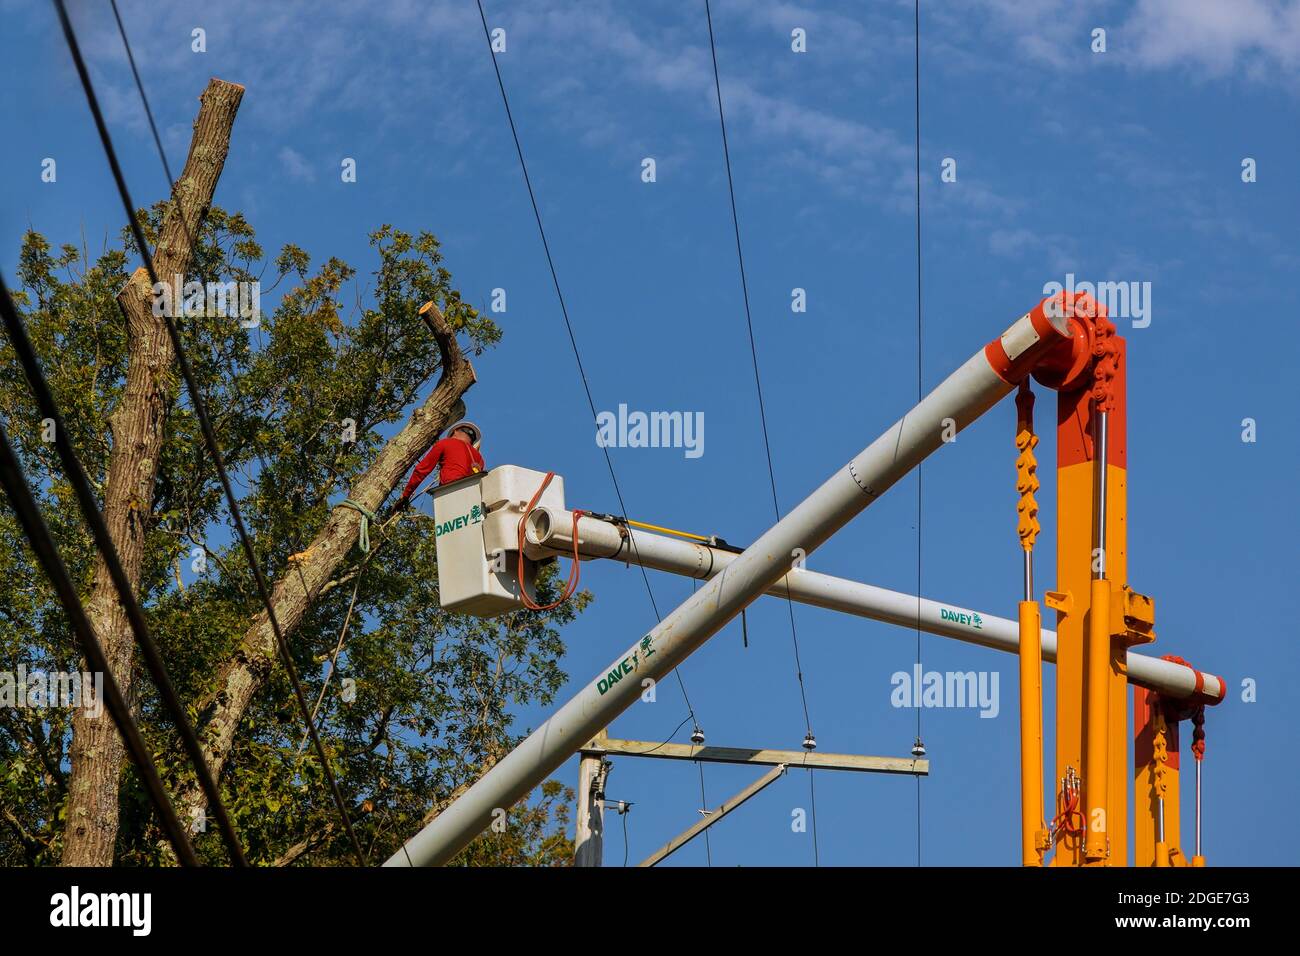 Man in orange work wear cutting tree branches over the wires on the height fallen tree in after a storm Stock Photo